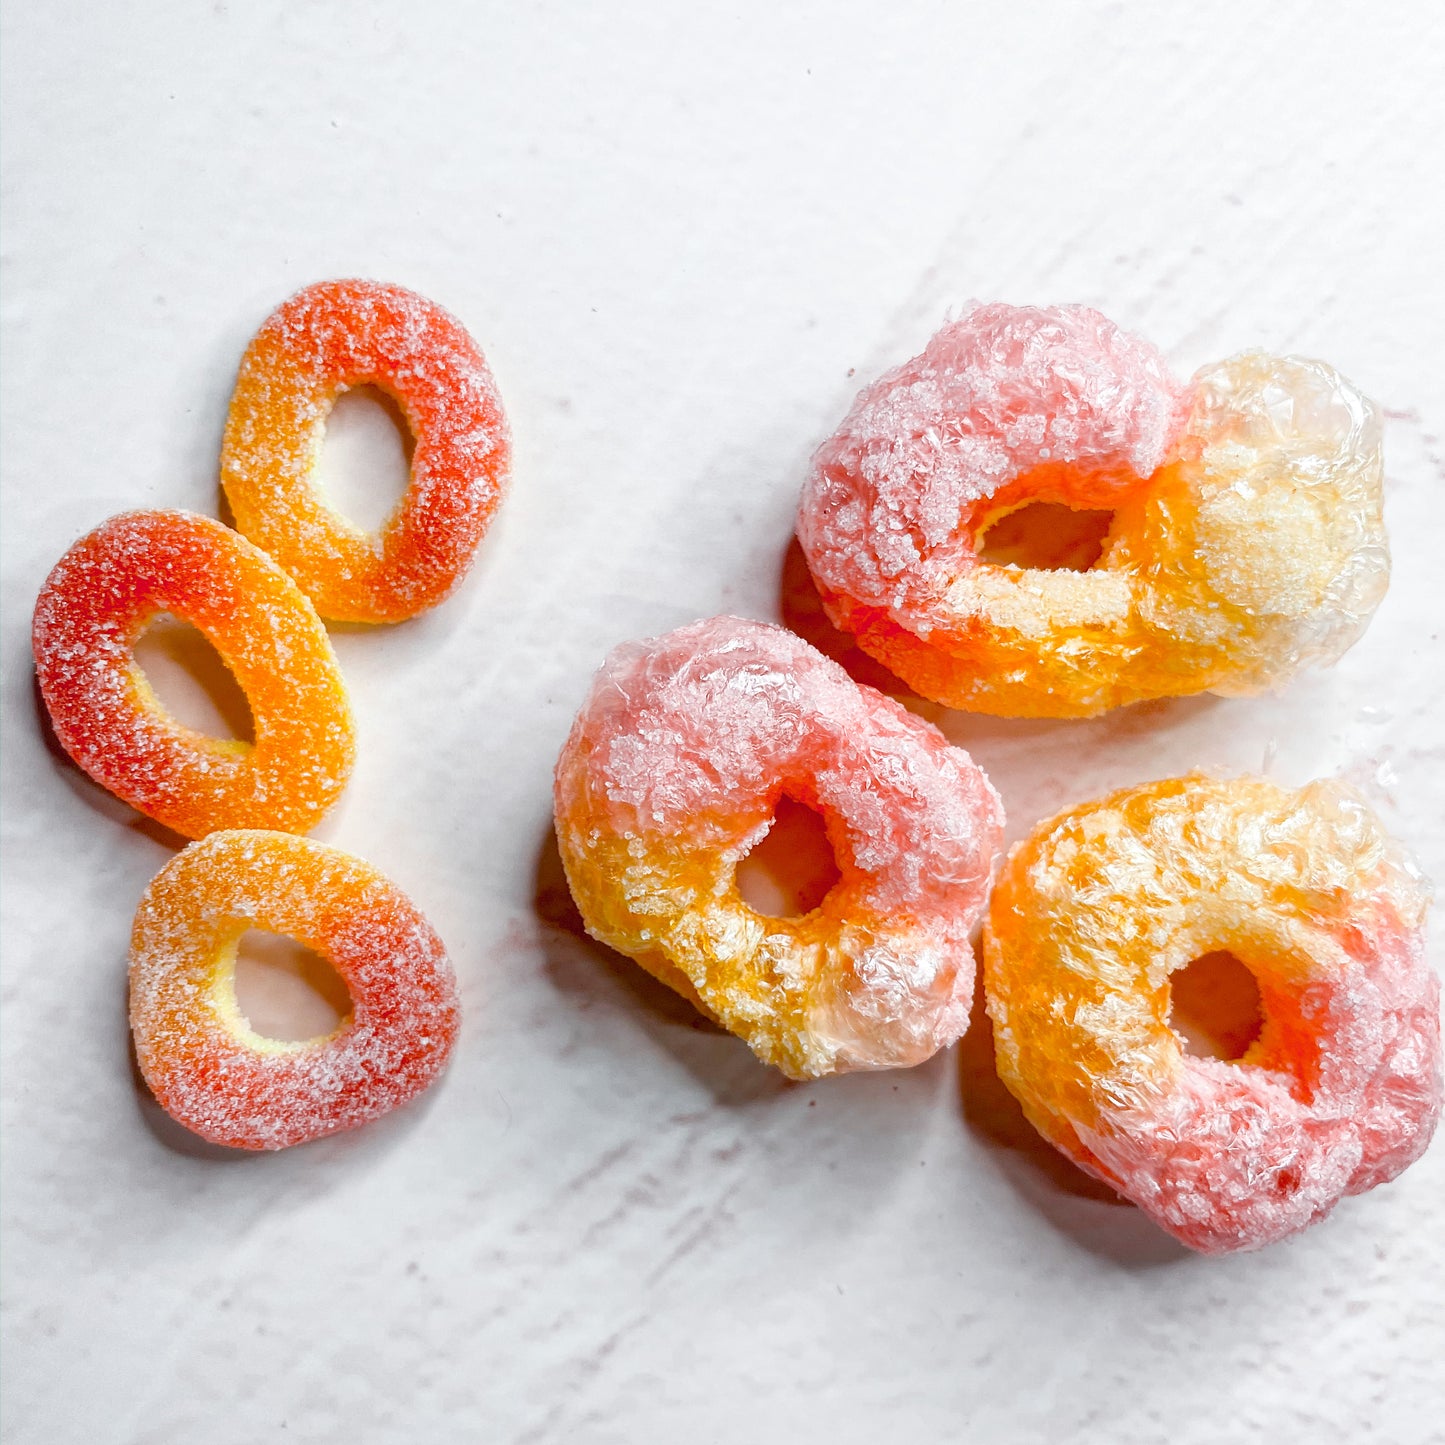 Peach Rings Before and After Freeze Drying